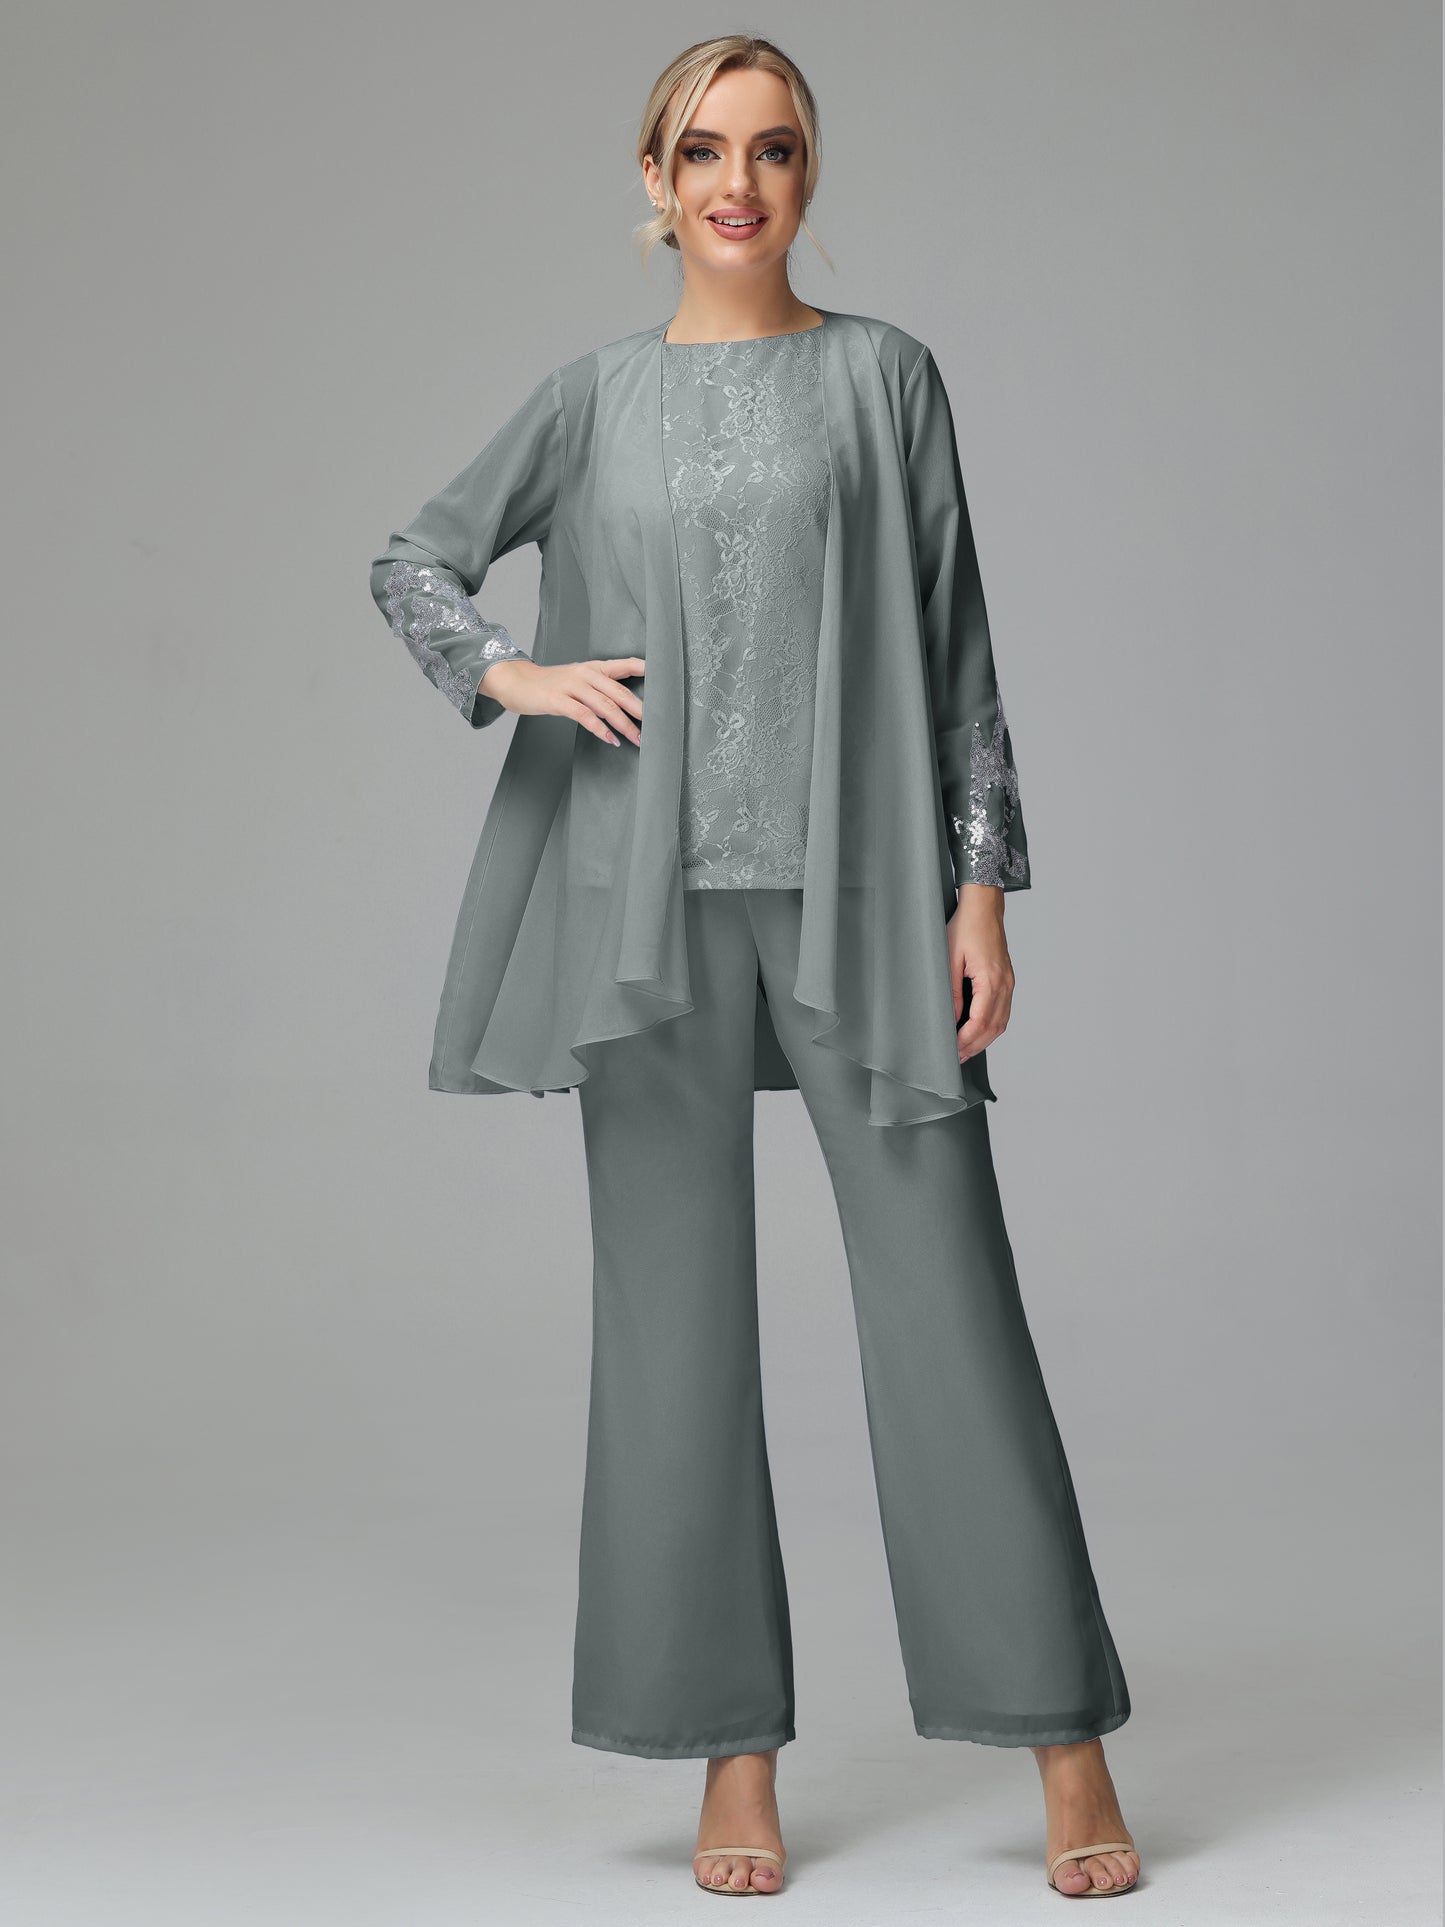 Long Sleeves Chiffon Lace Mother Of The Bride Dress Pants Suits